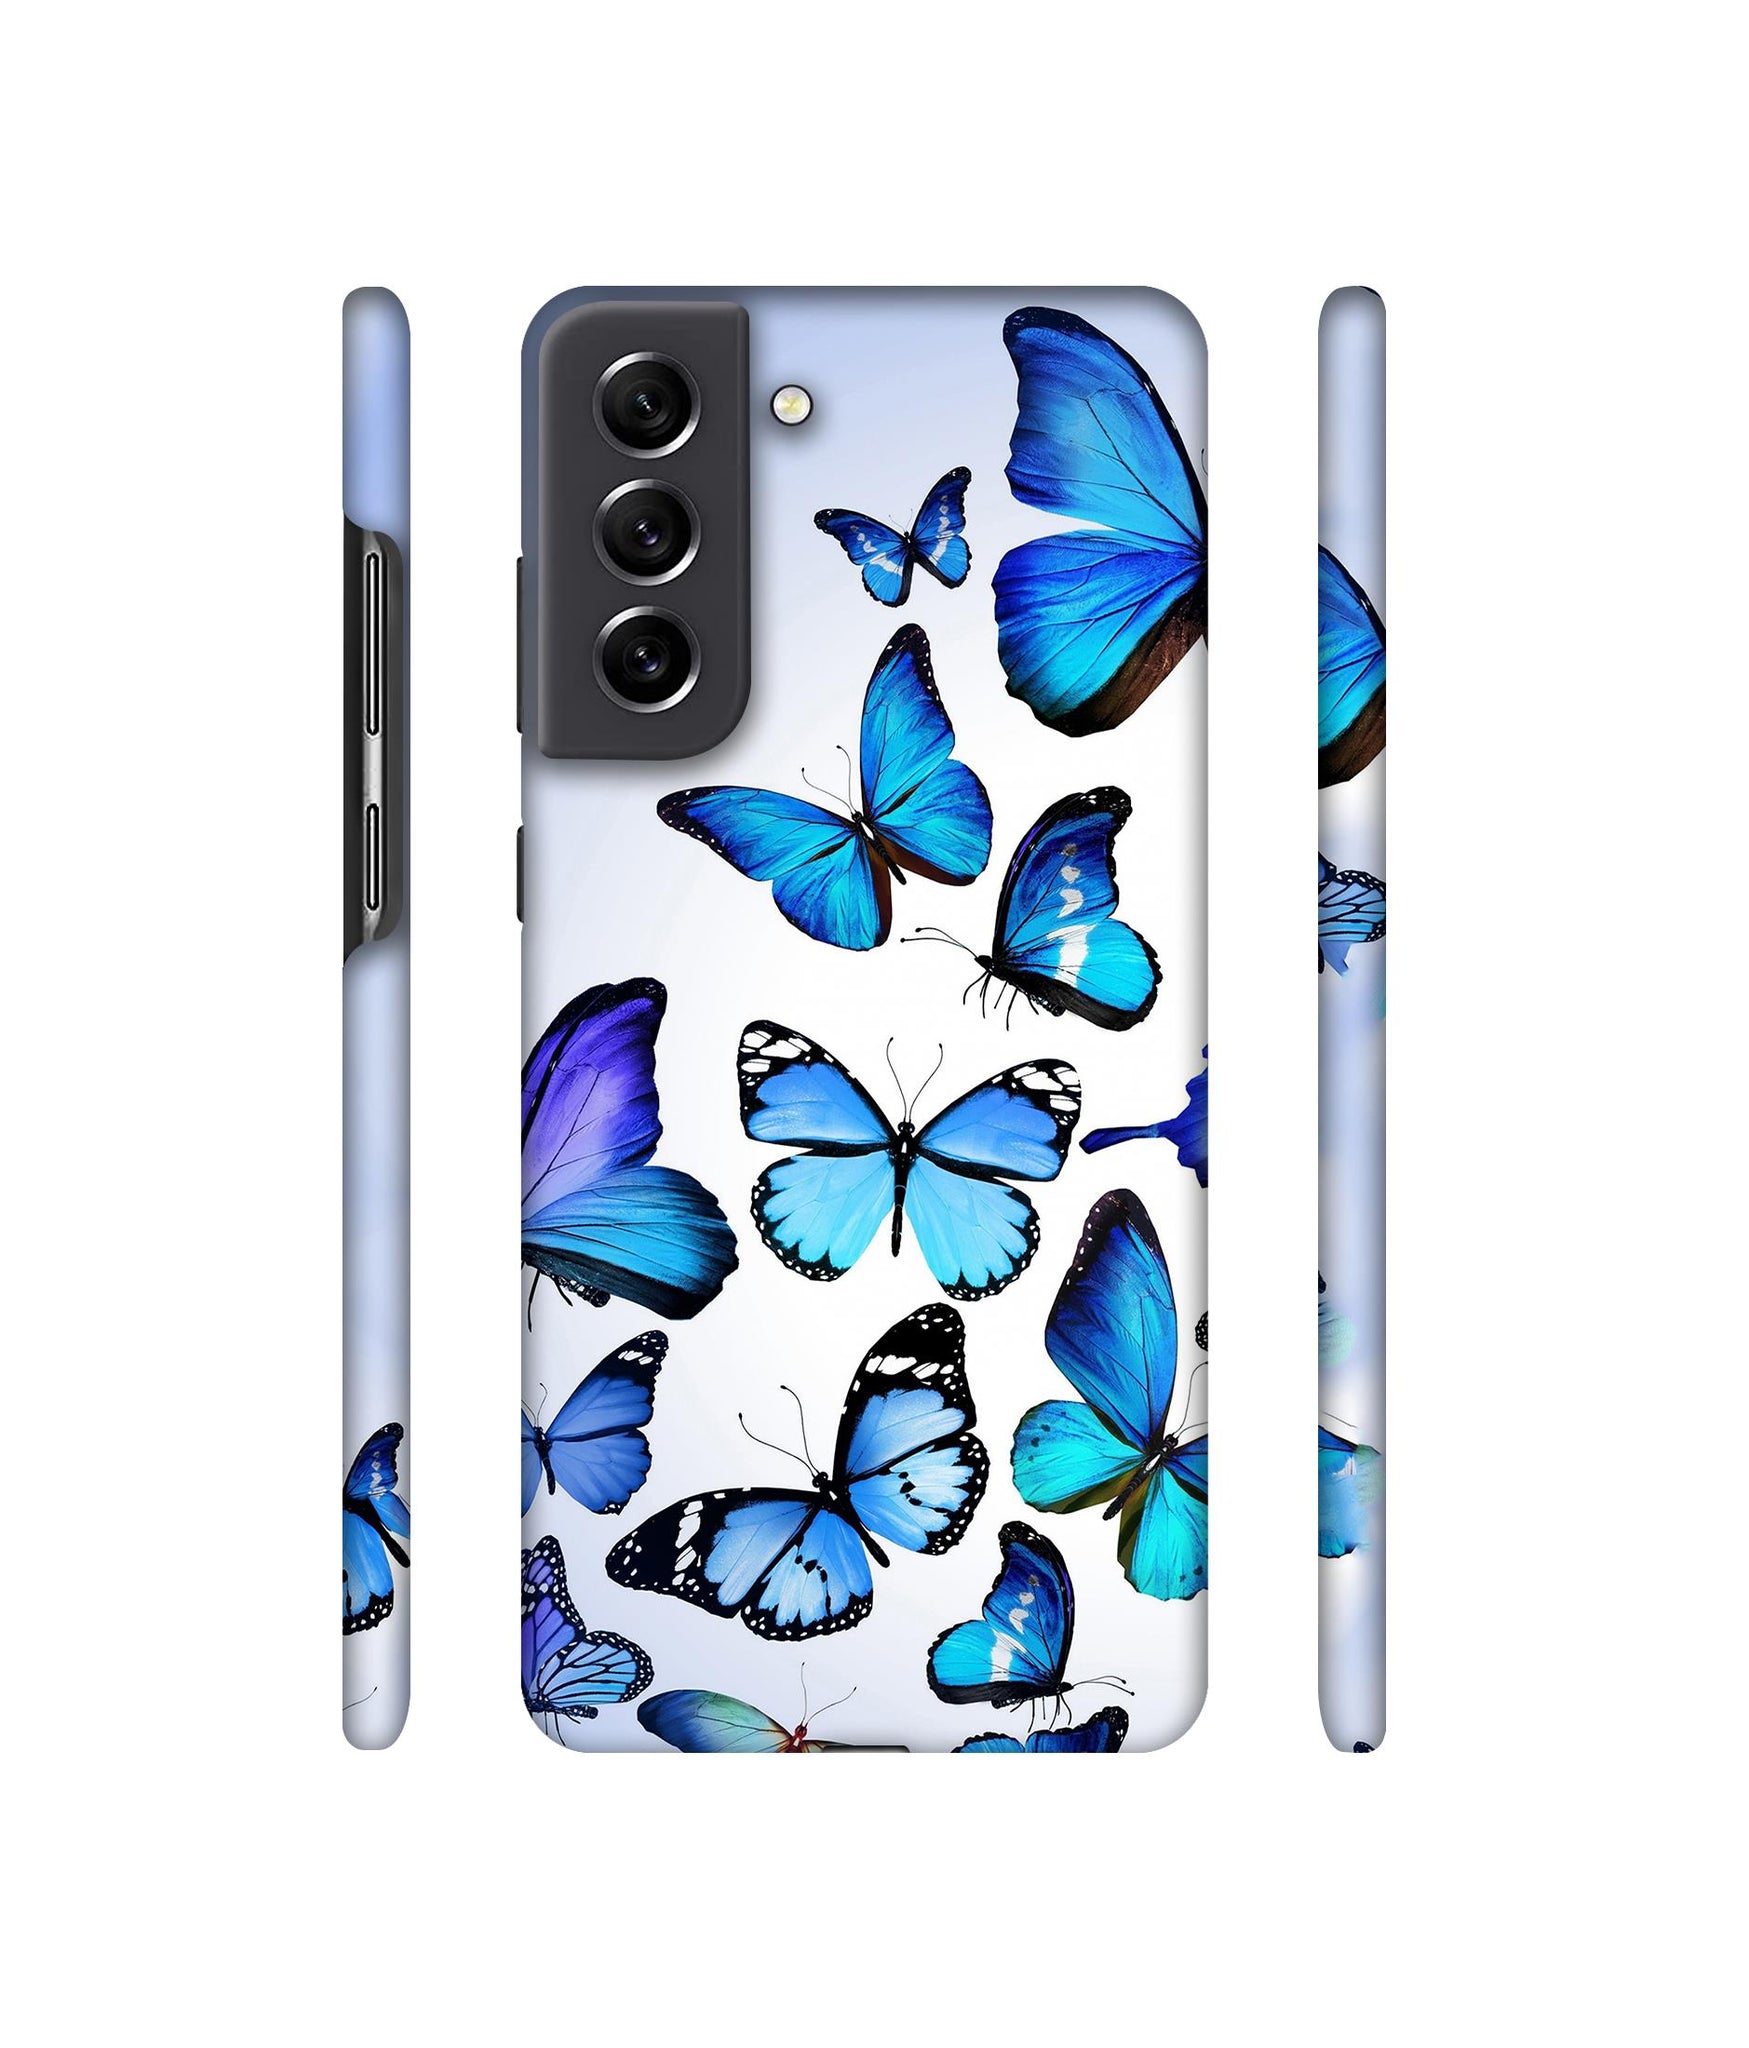 Colorful Flying Butterfly Designer Hard Back Cover for Samsung Galaxy S21 FE 5G